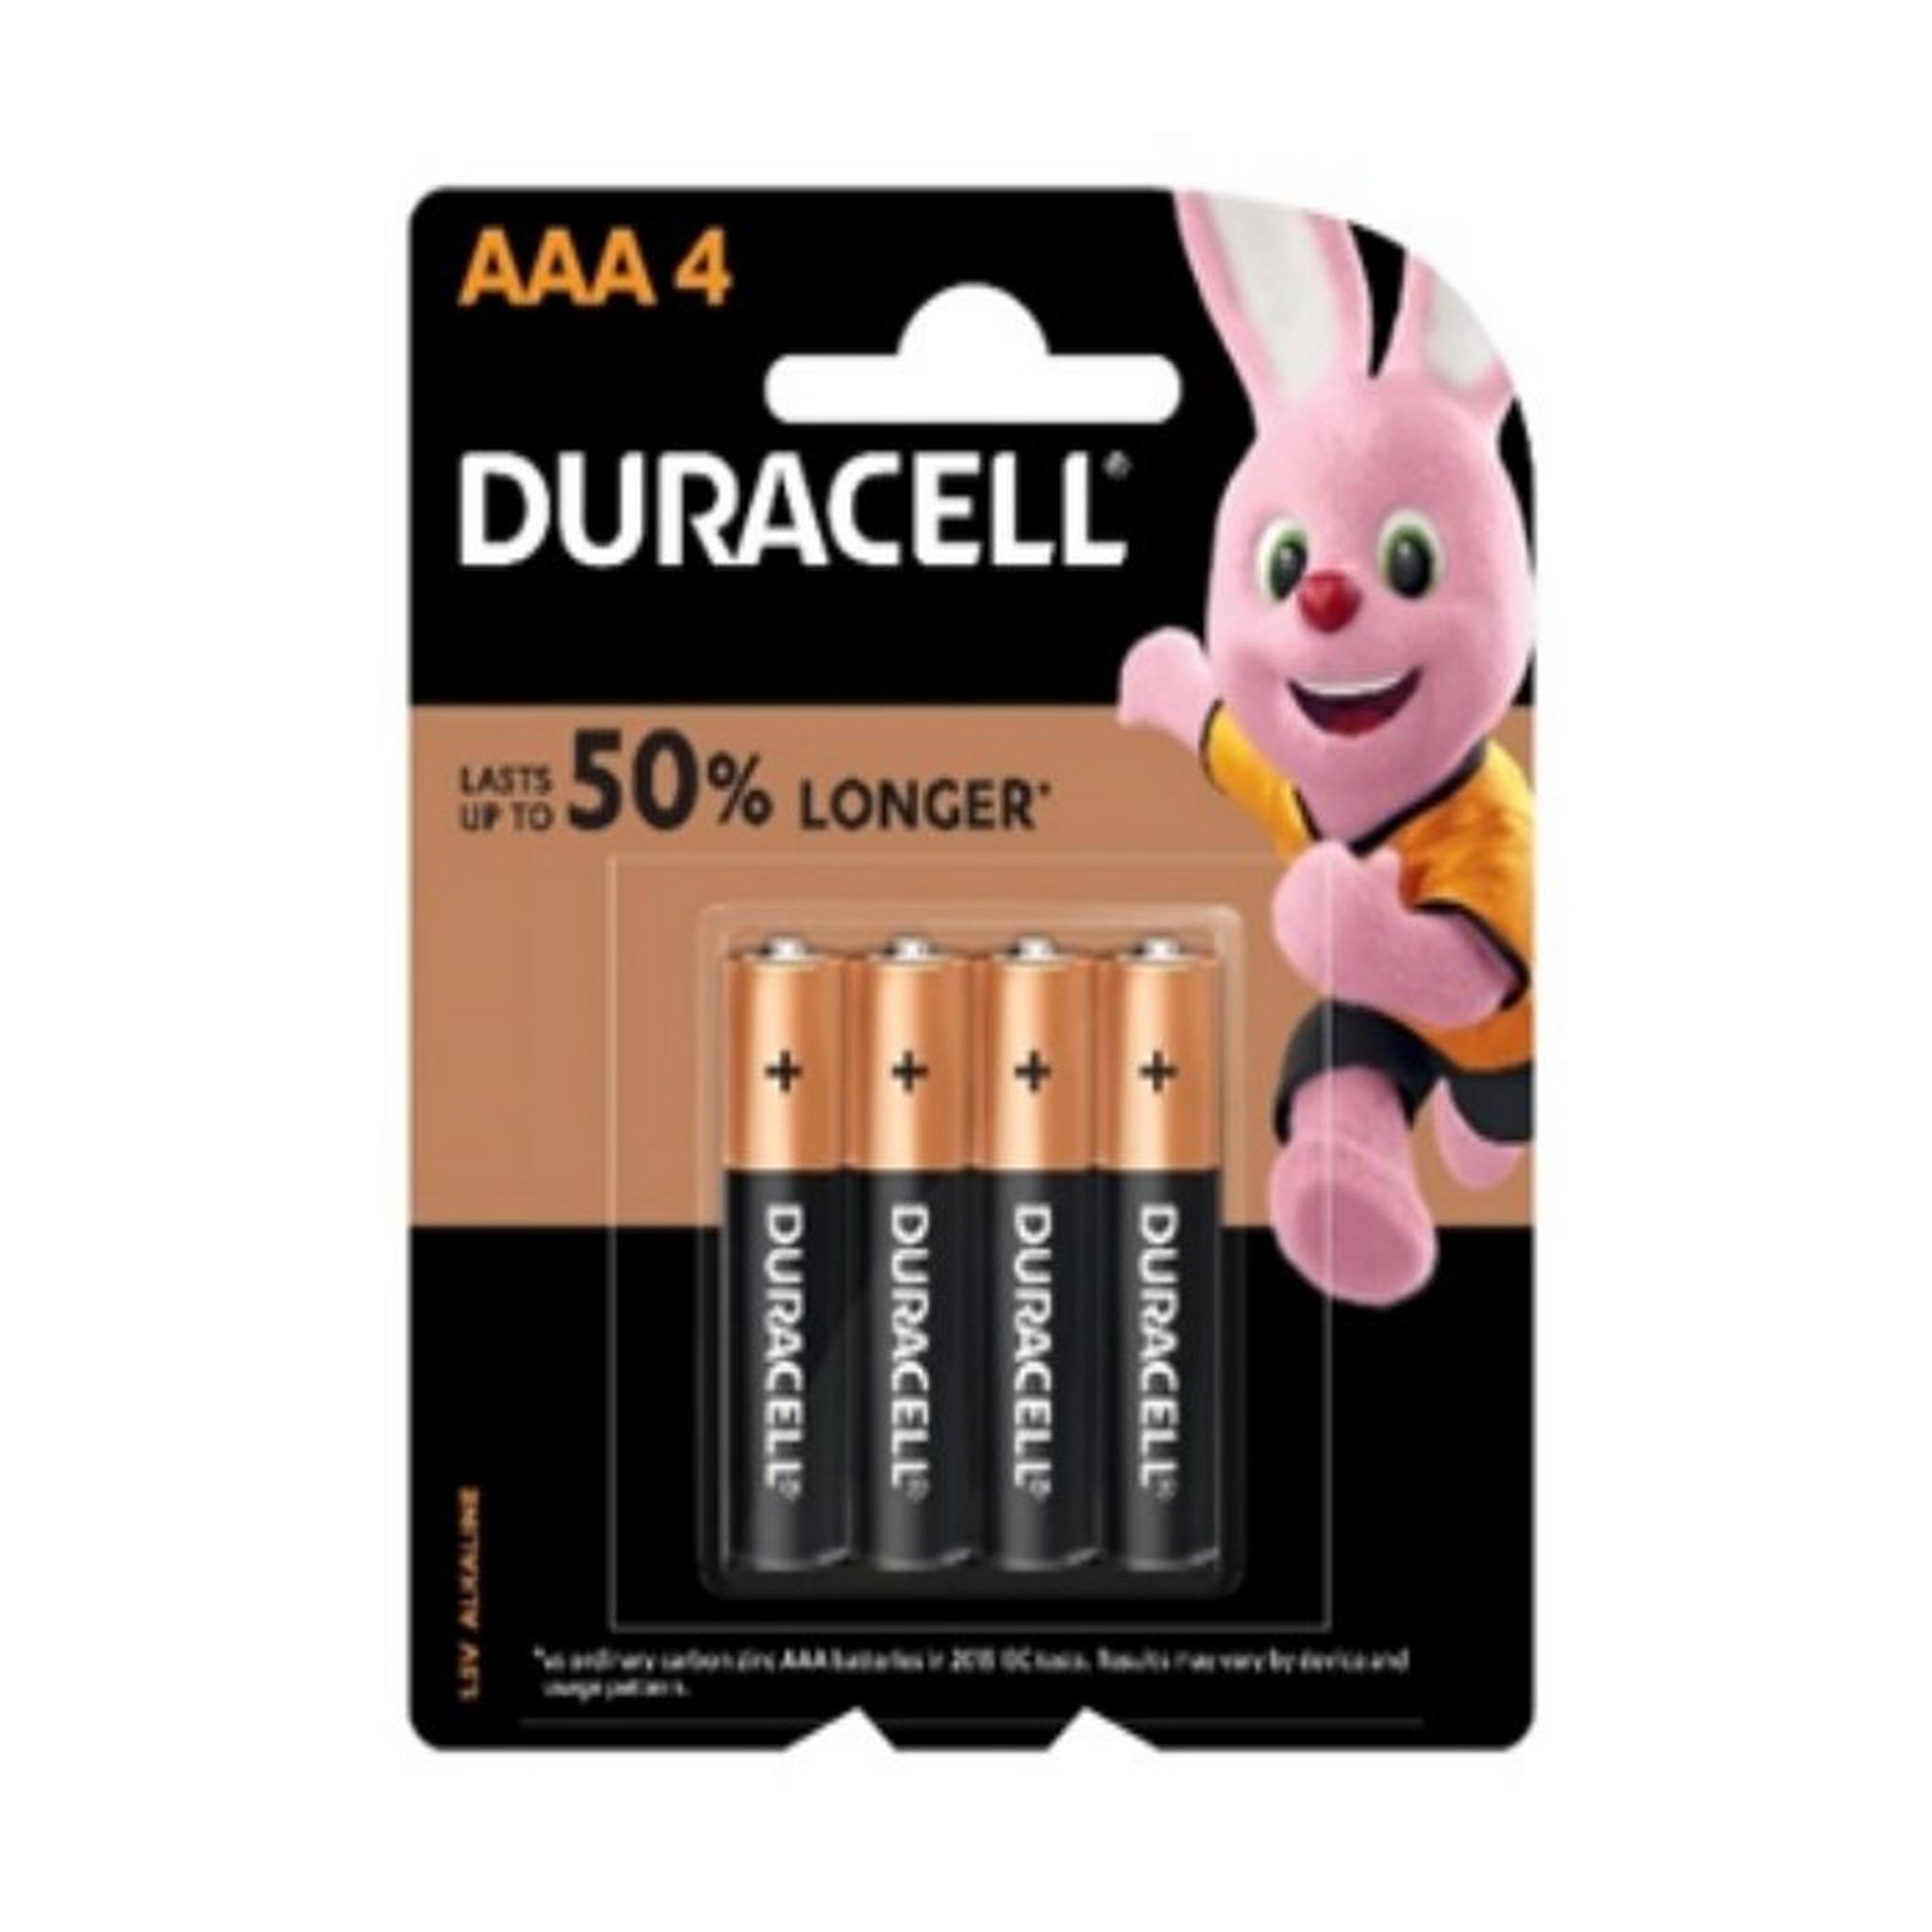 Duracell Plus Power AAA Batteries - 4 Pack